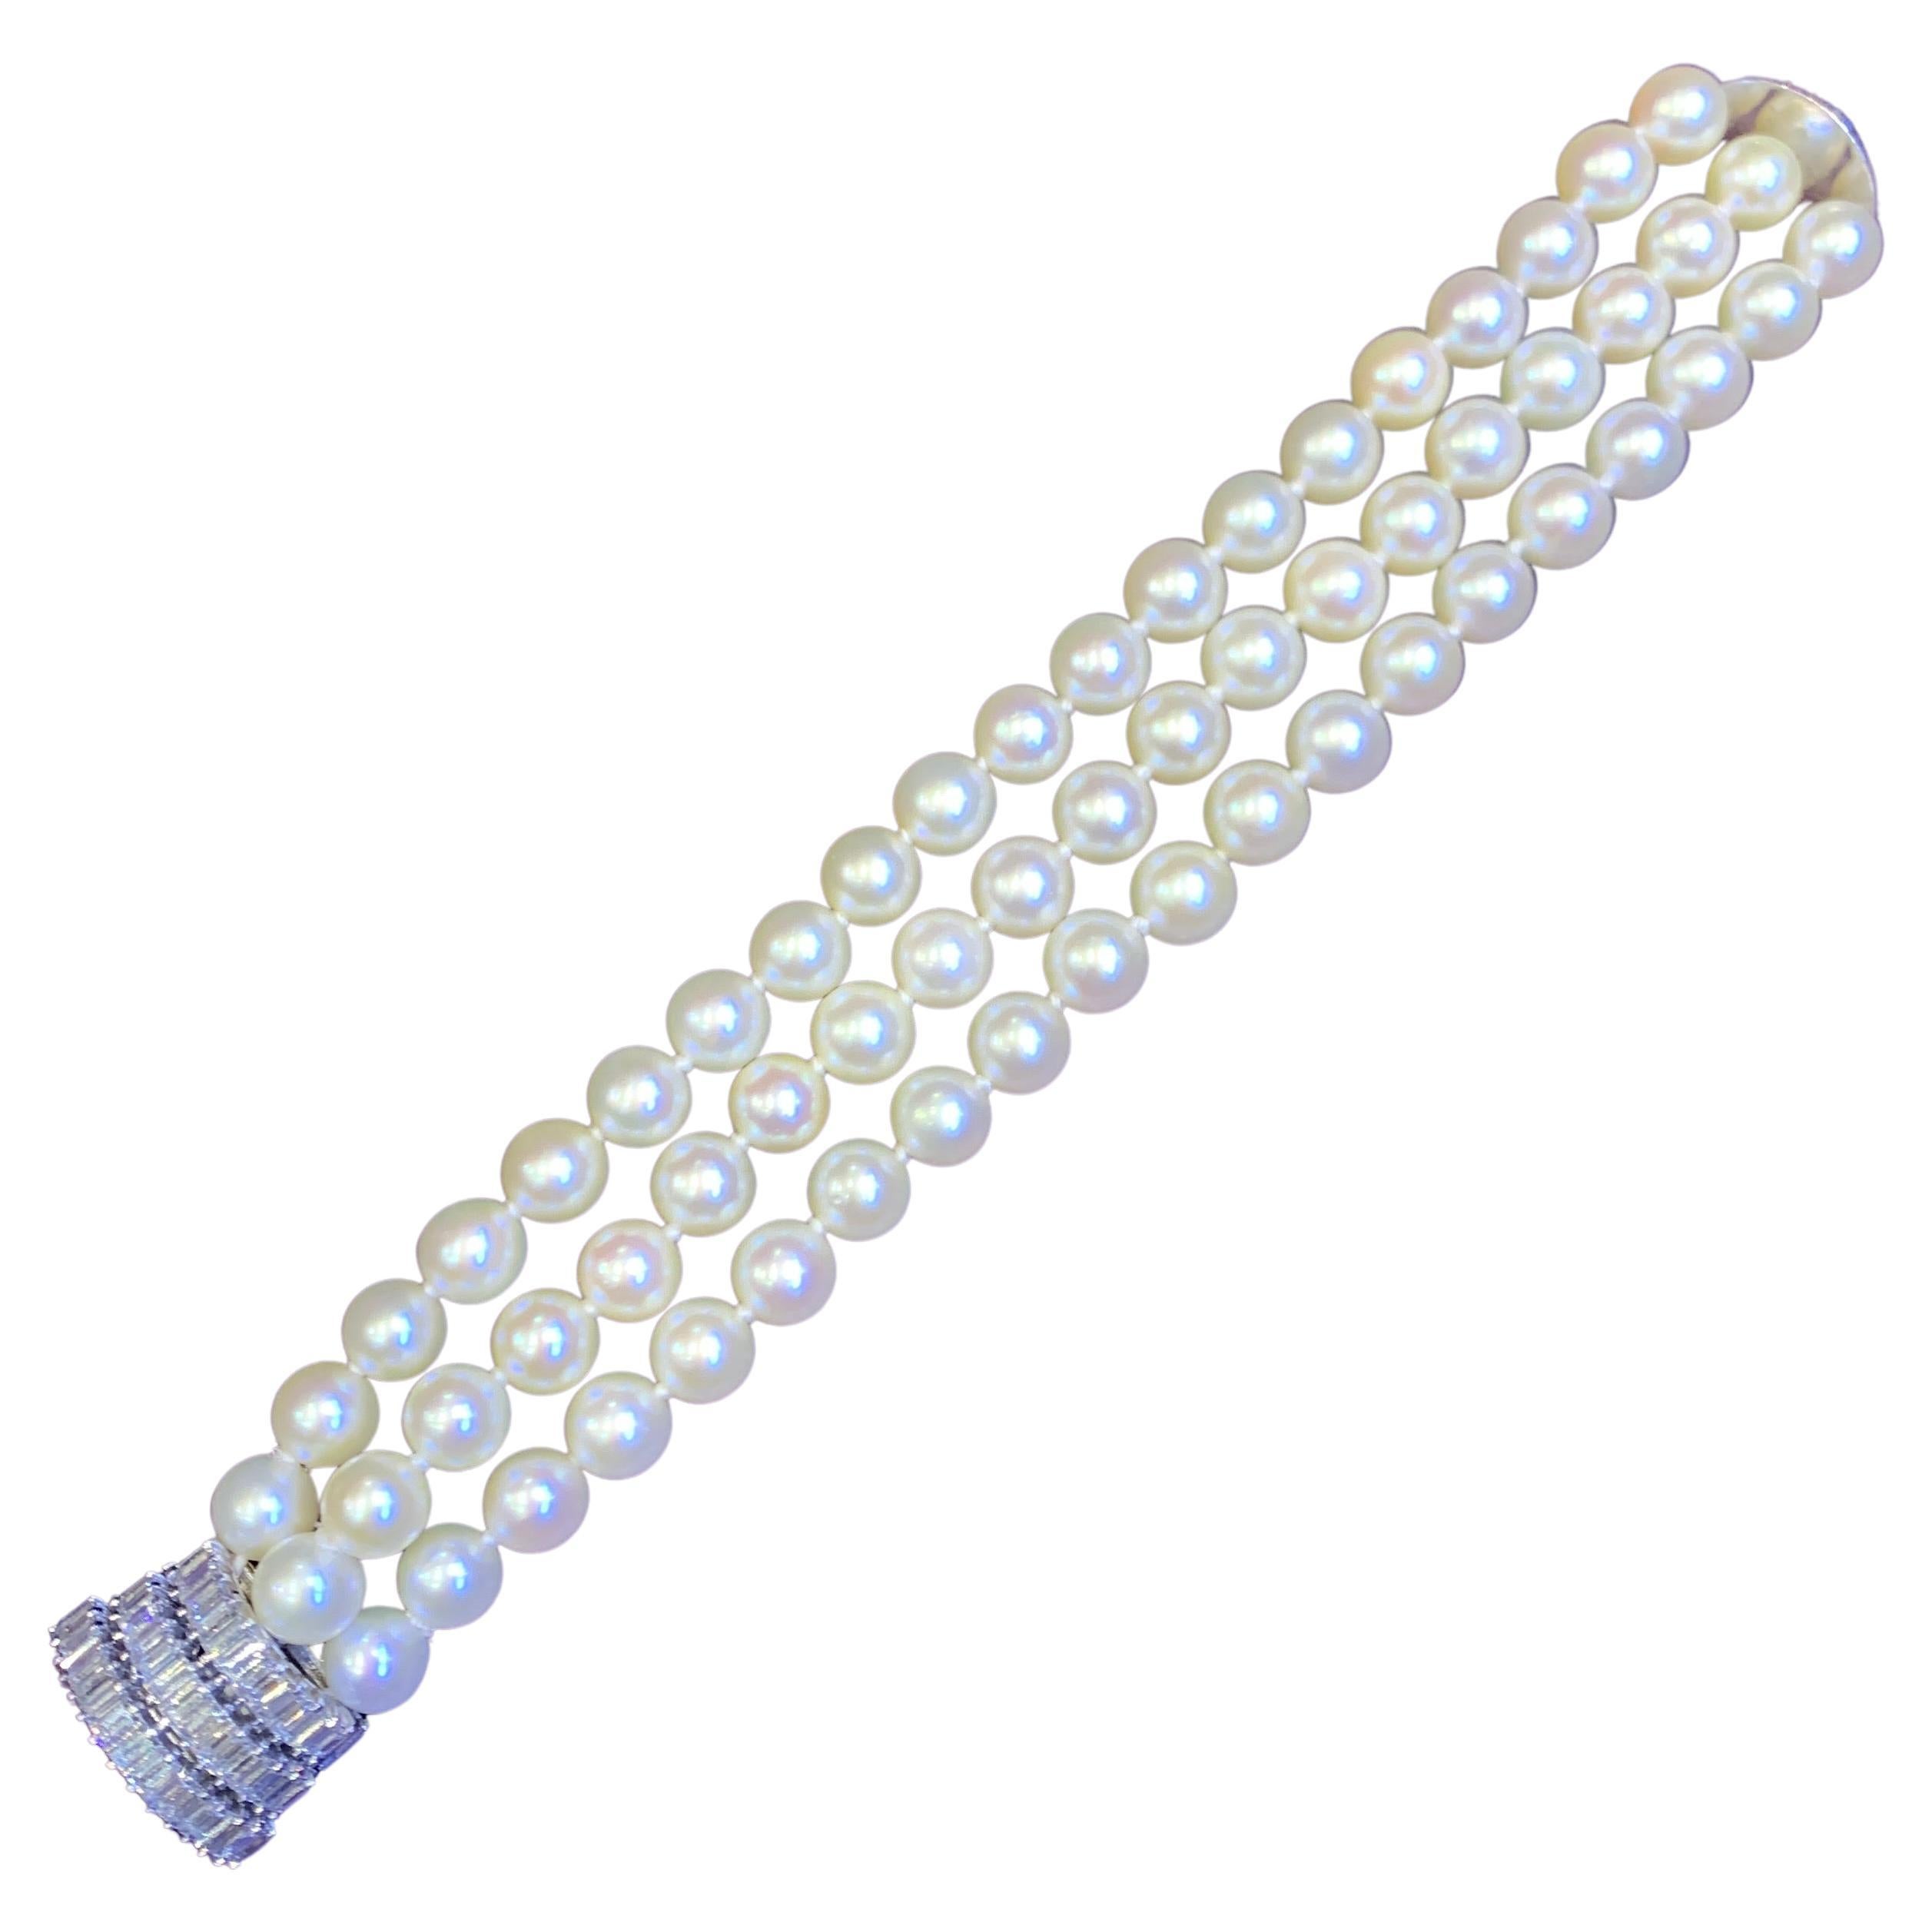 Three Strand Pearl & Diamond Bracelet

This bracelet consists of 3 rows of pearls attached by a platinum clasp set with 39 baguette cut diamonds 

Total Approximate Diamond Weight: 4.29 carats

Length: 6.75